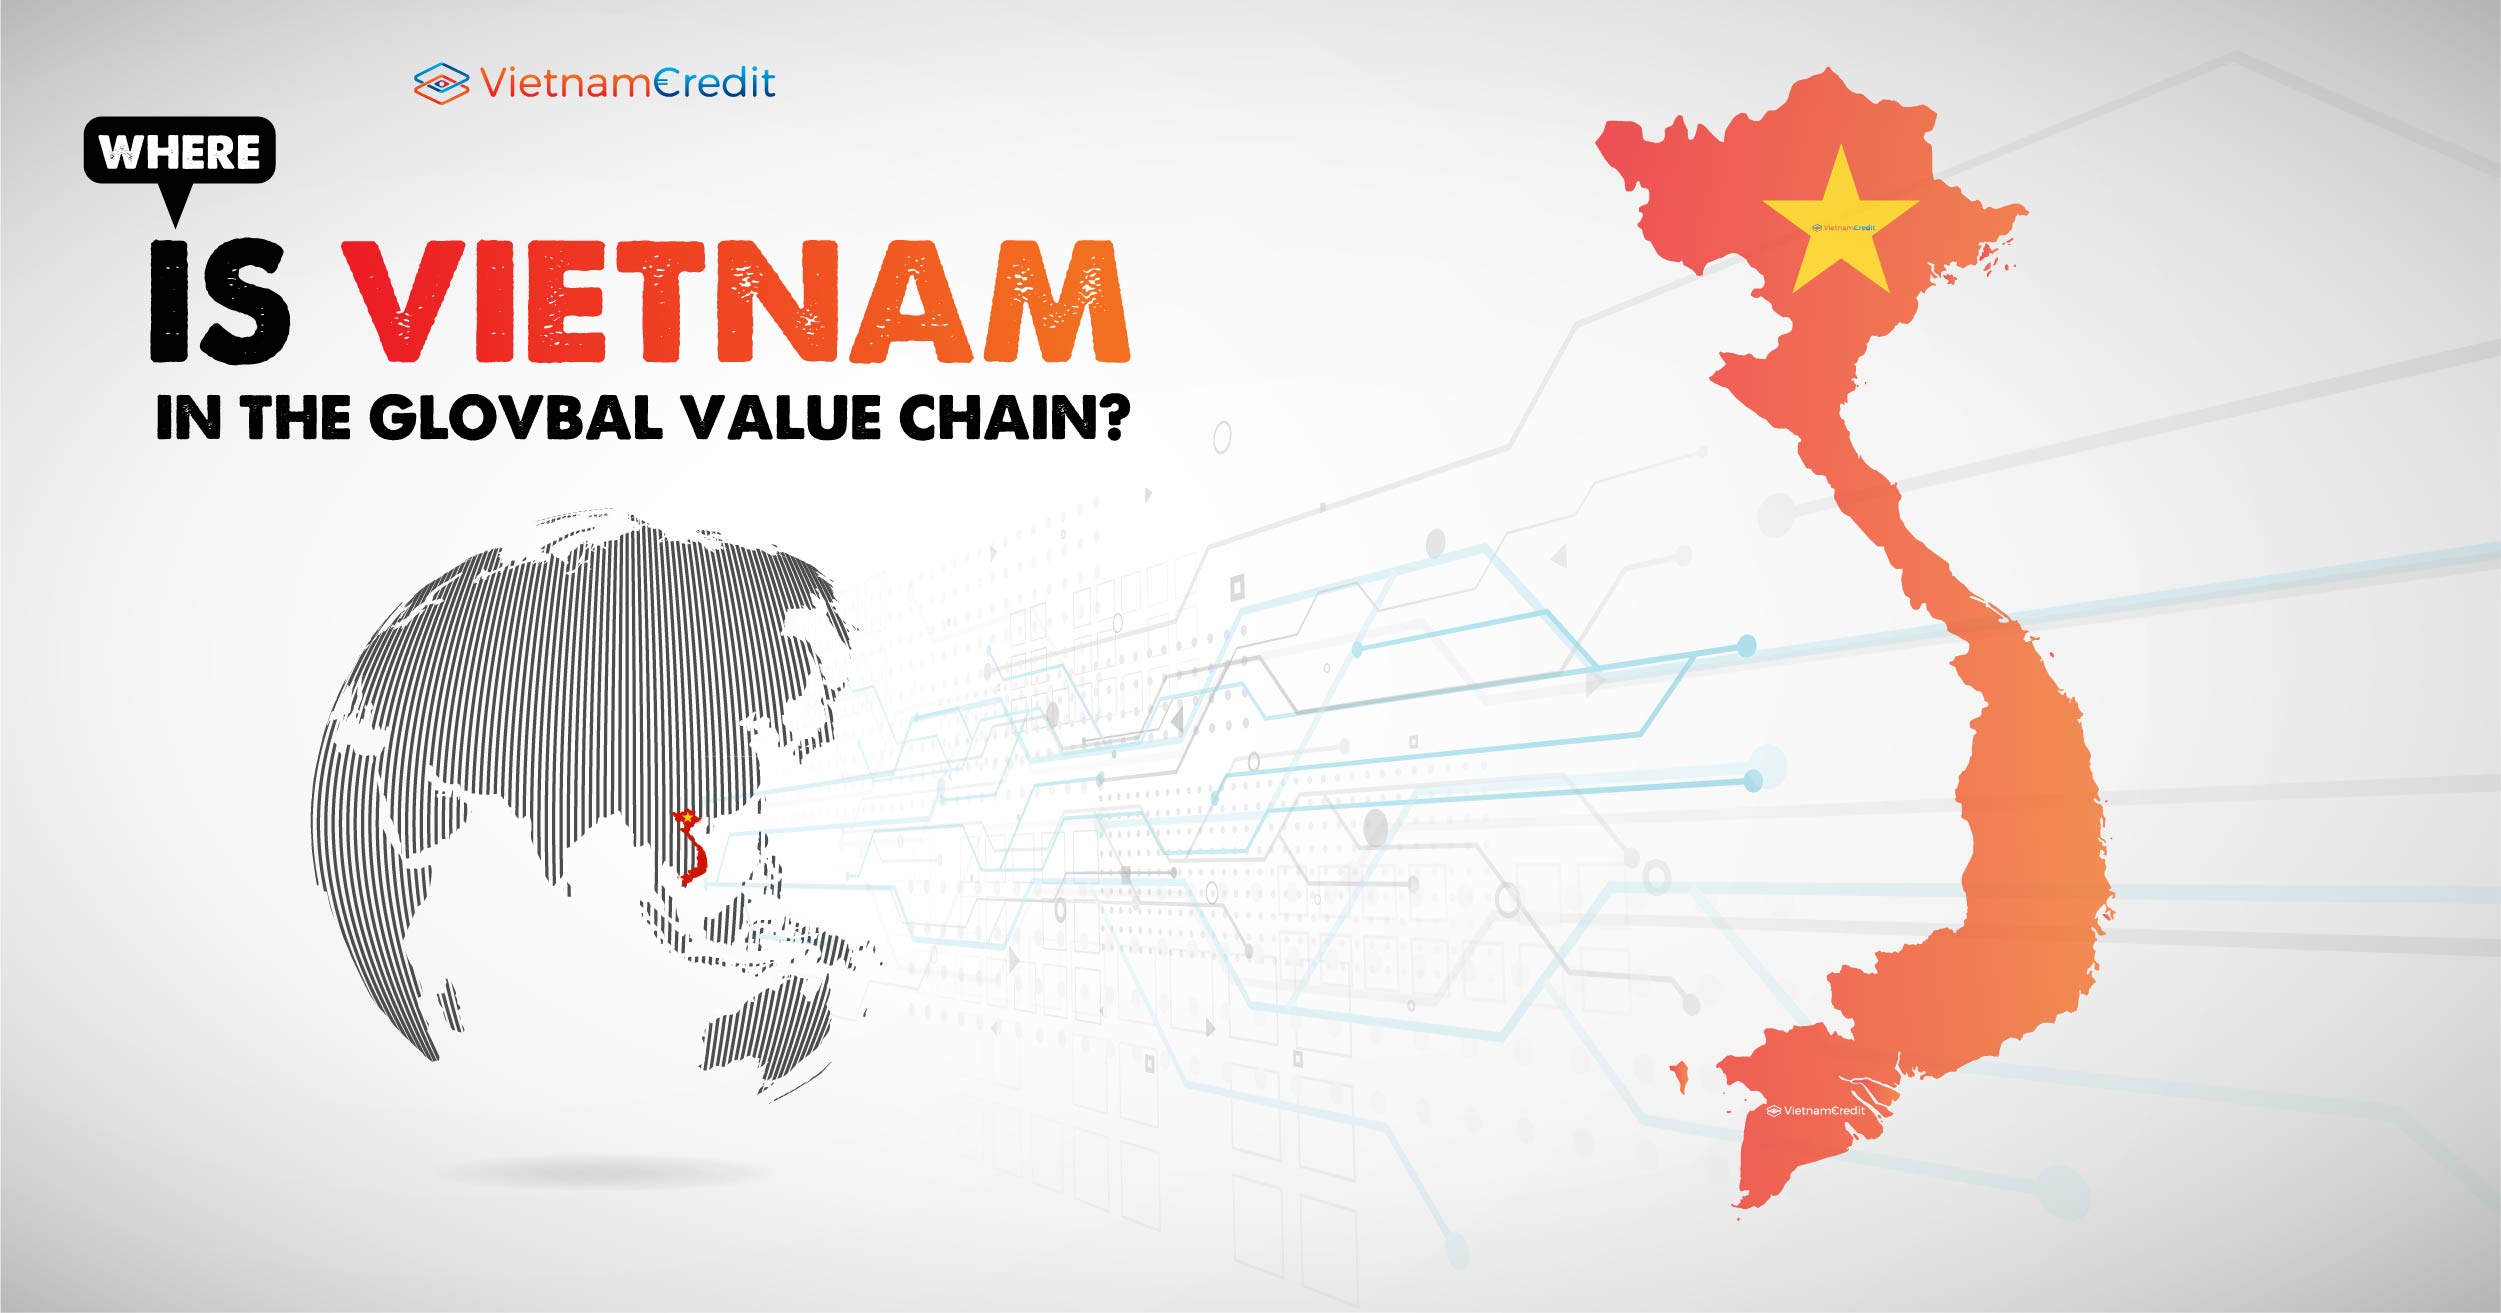 Where is Vietnam in the global value chain?